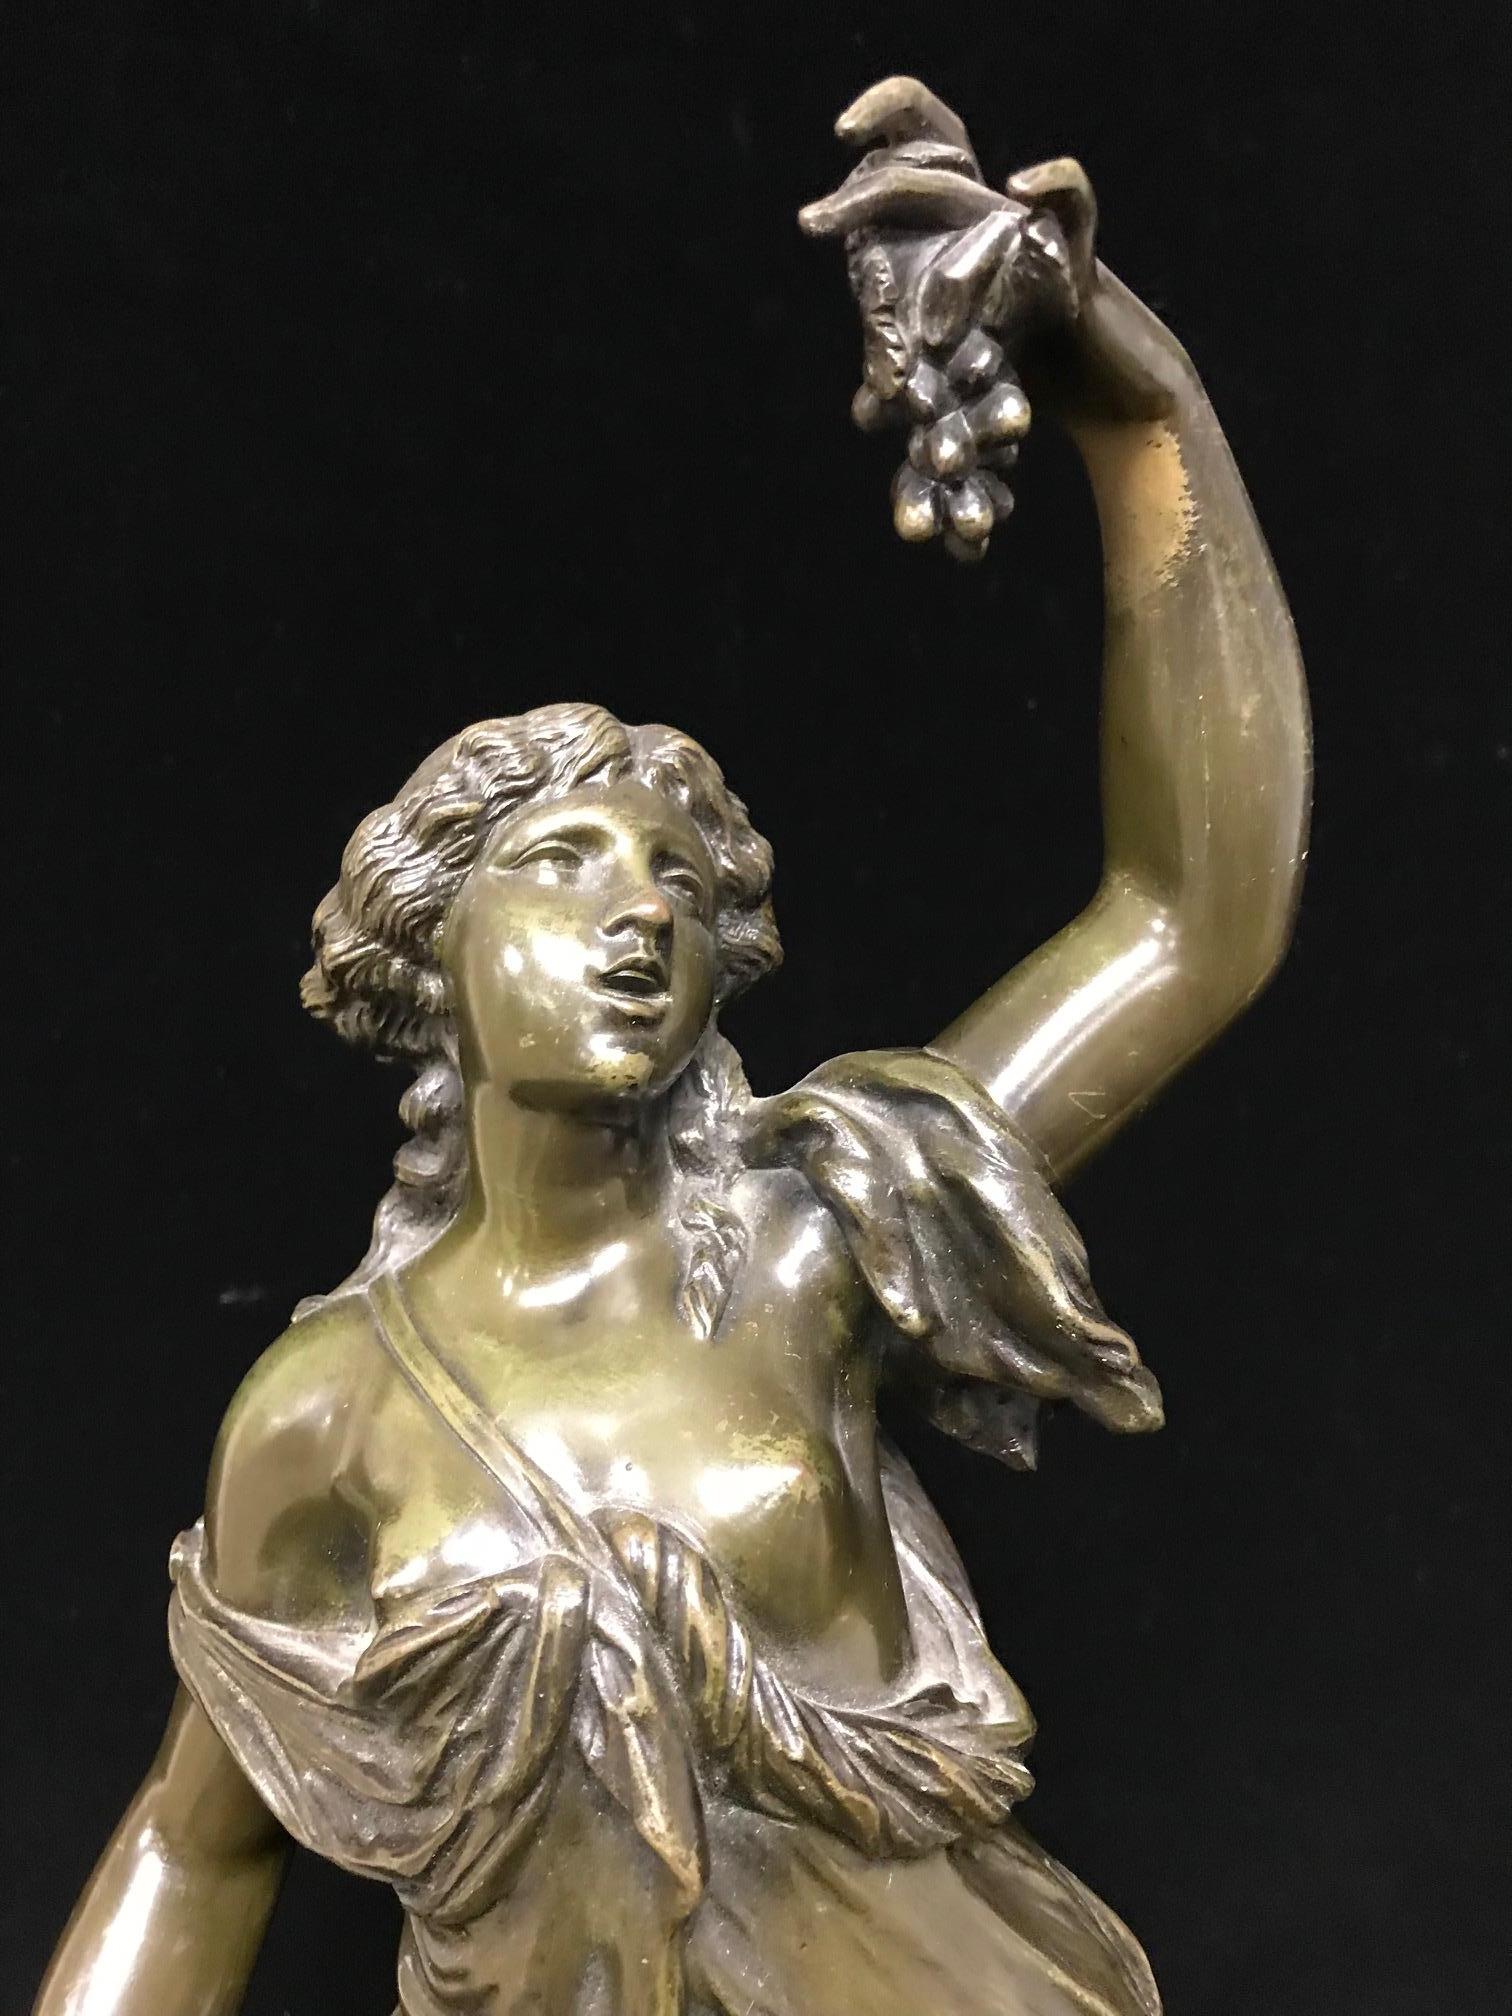 DESCRIPTION
Antique French Bronze Bacchanale, 
Claude Michel Clodion was a French Rococo sculptor. Noted for his versatility as an artist and for the lively charm of his figures, which included Grecian nymphs, cherubs, and gods, Clodion was both